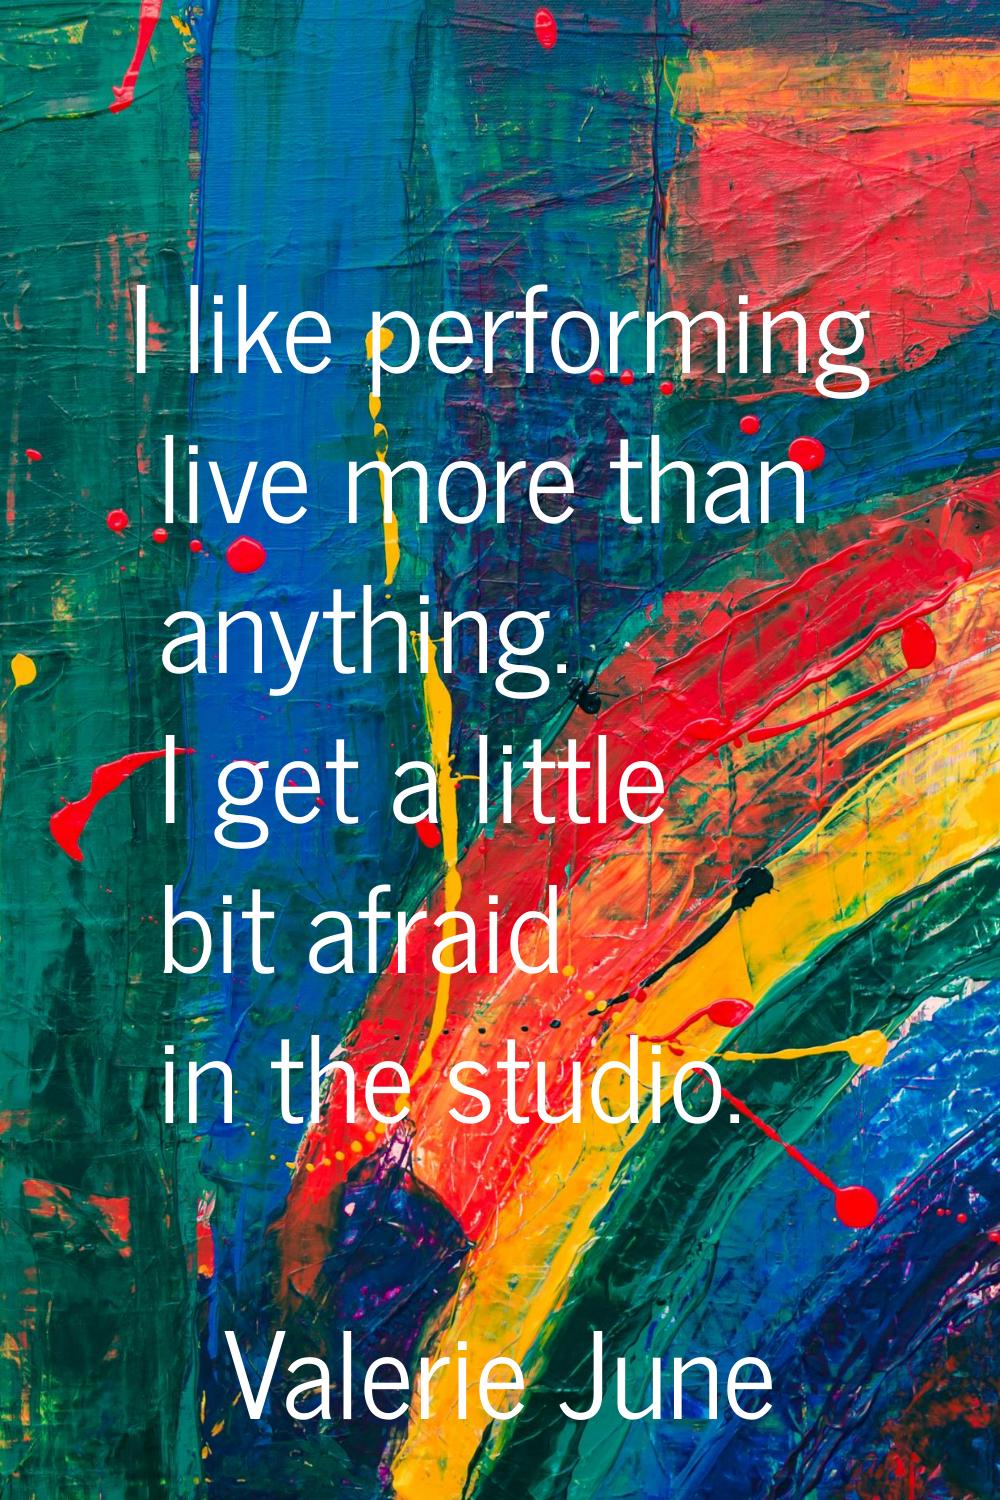 I like performing live more than anything. I get a little bit afraid in the studio.